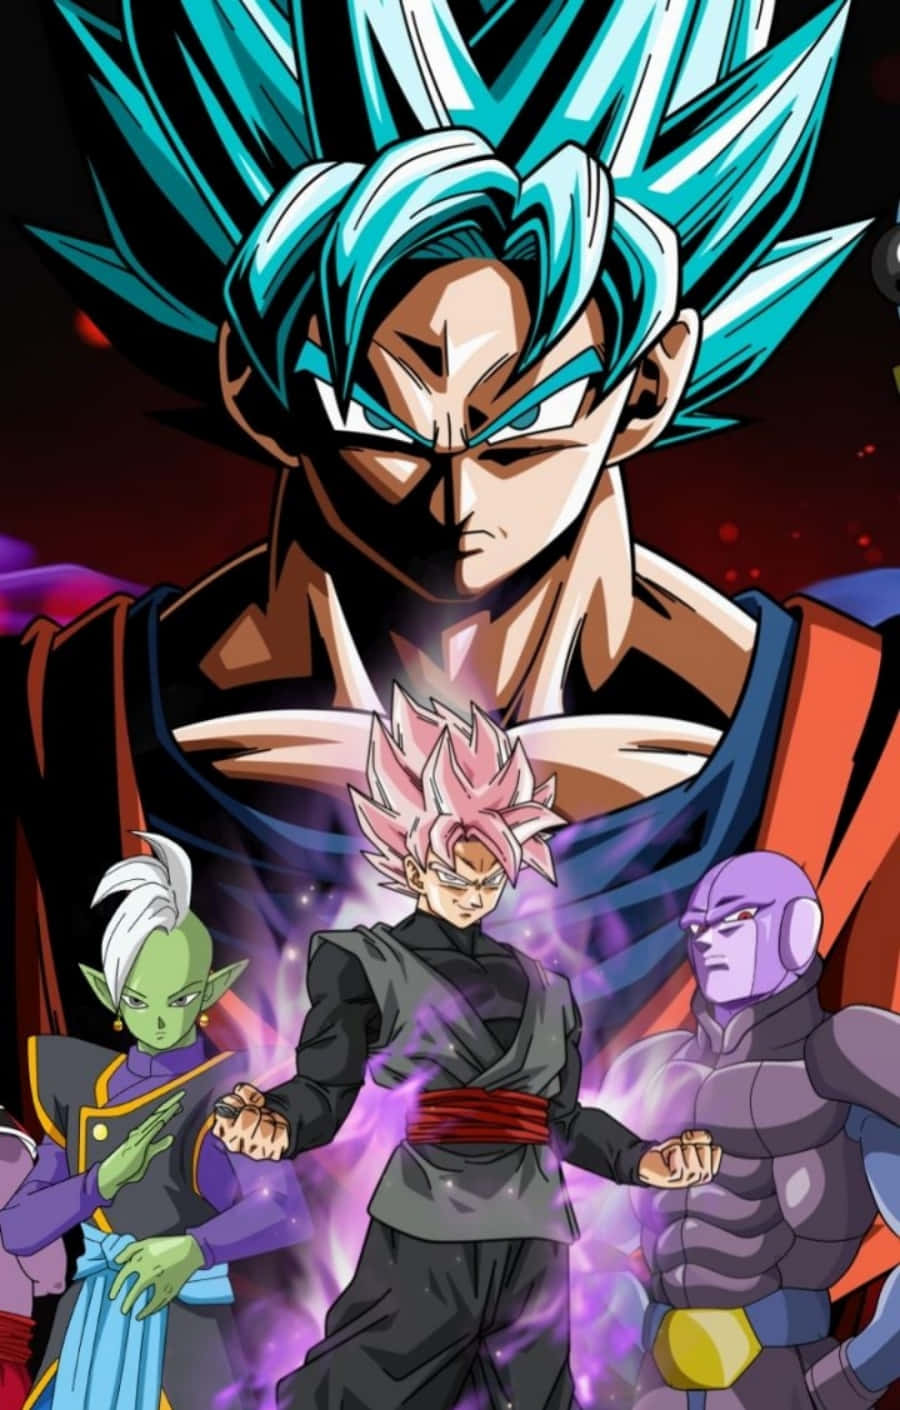 "Be thrilled with the awesome power-ups of Dragon Ball Super! Wallpaper